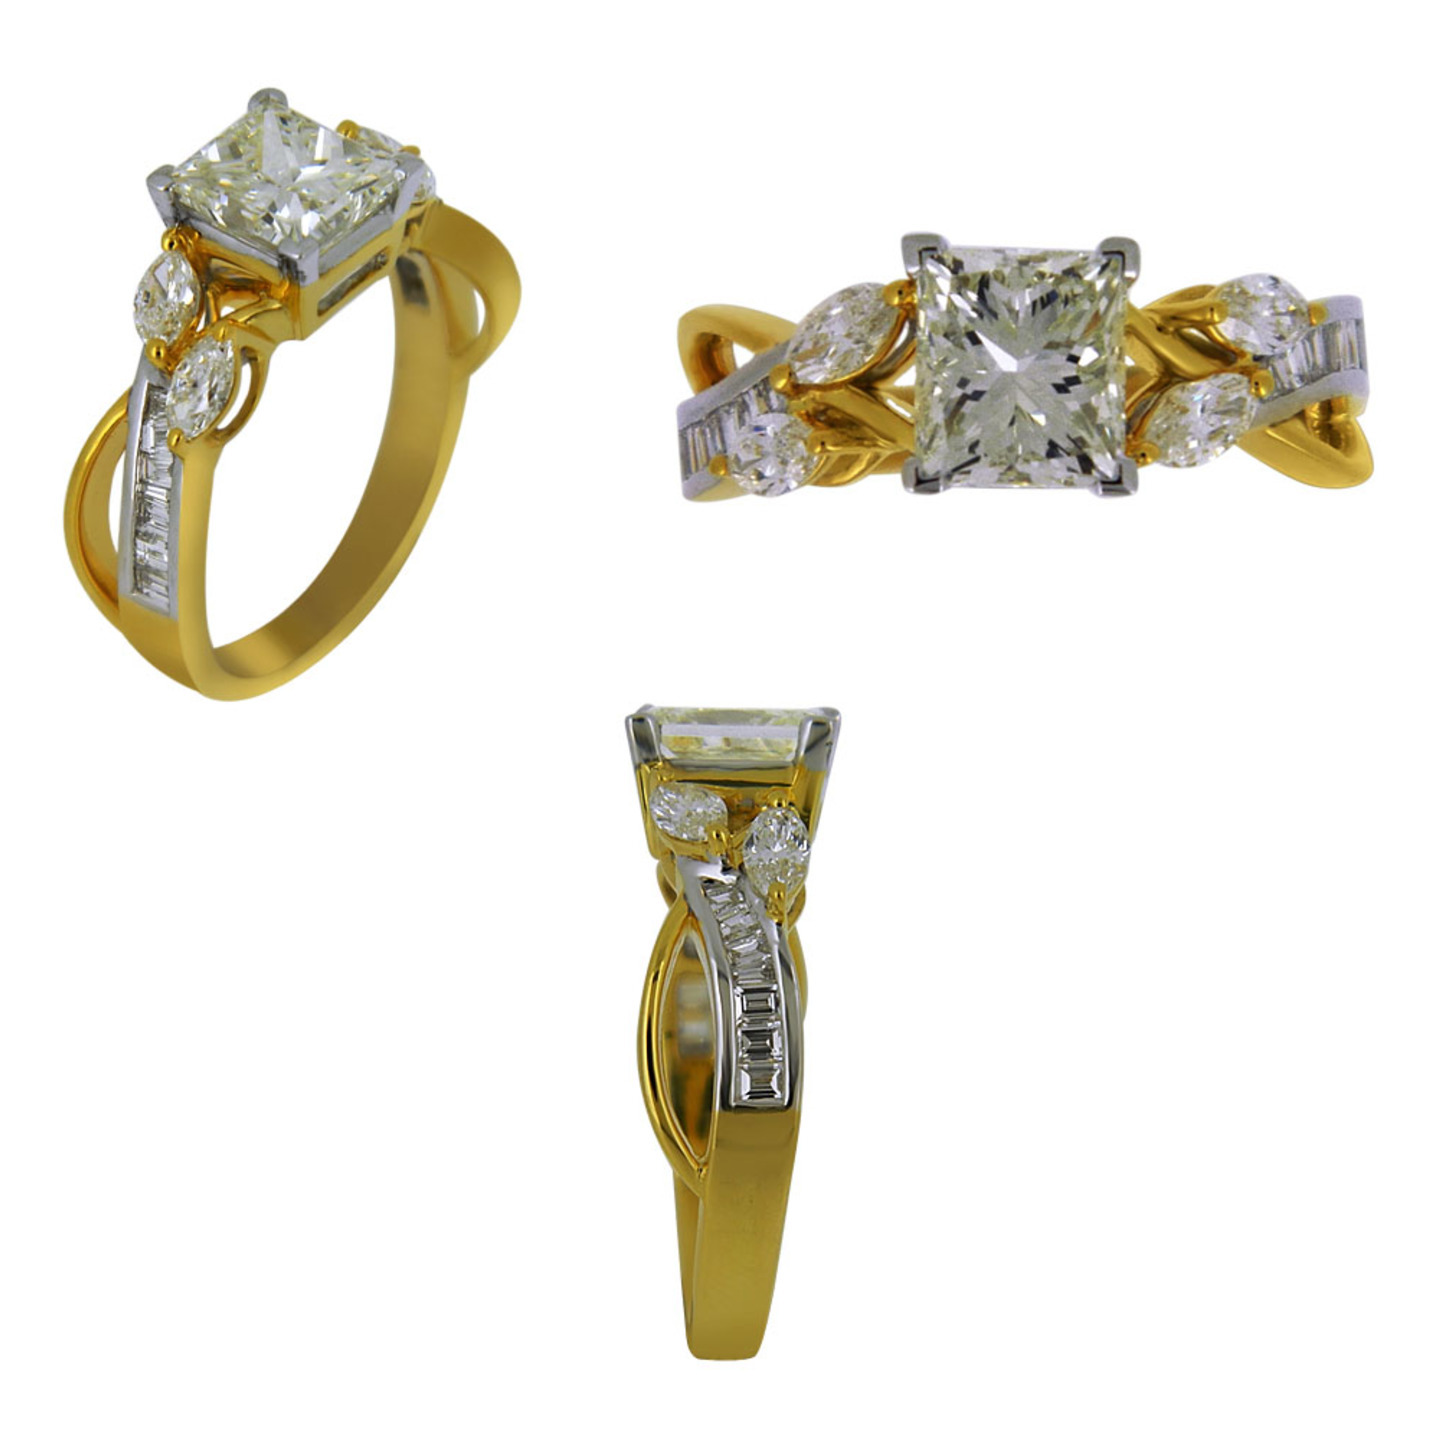 Timeless and elegant Princess diamond solitaire rings